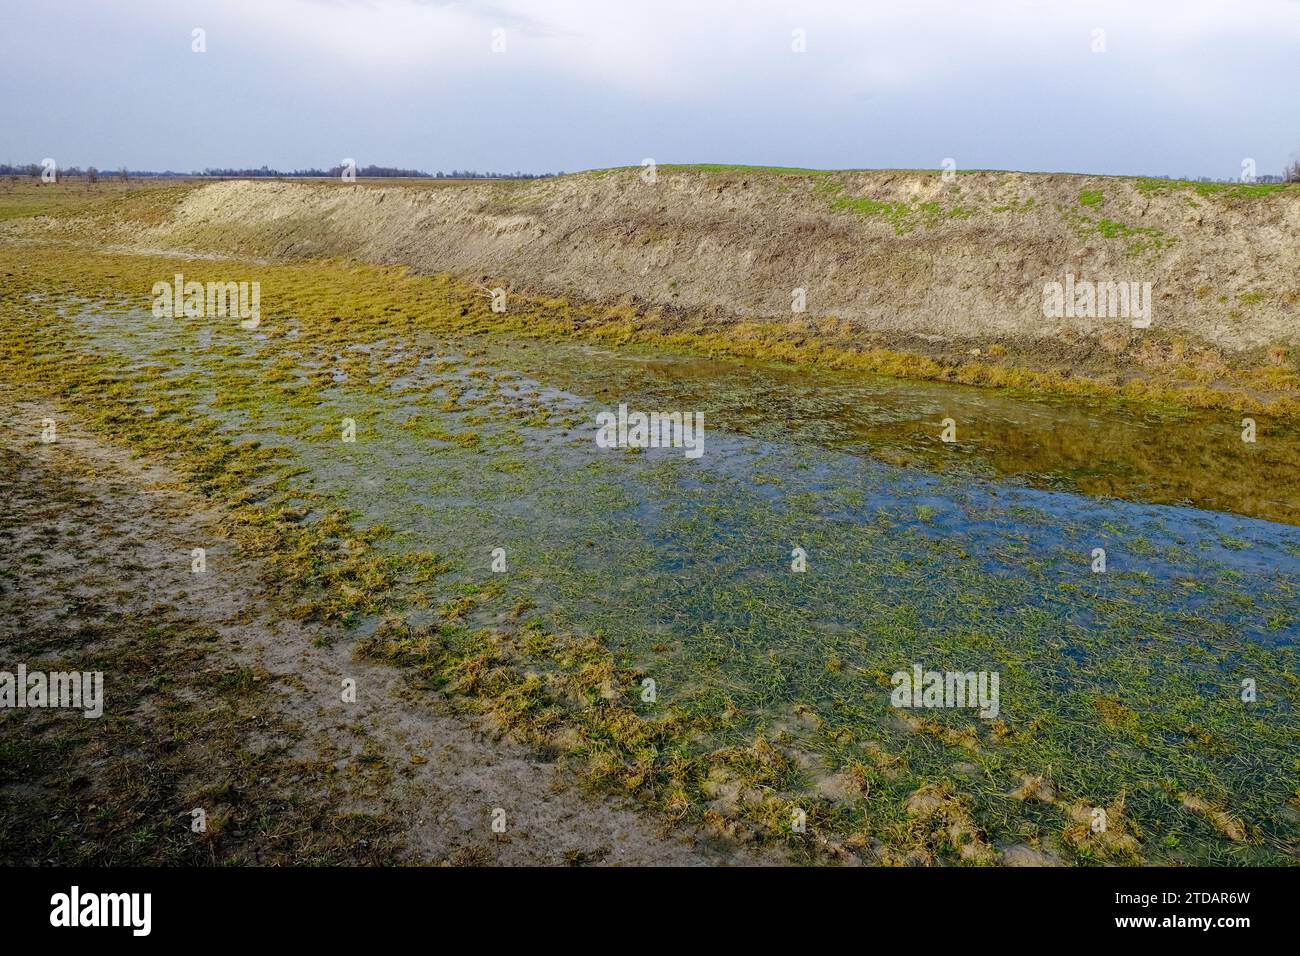 A shallow body of water, its surface covered in green algae, is depicted, with a dirt embankment and a blue sky in the background. Stock Photo